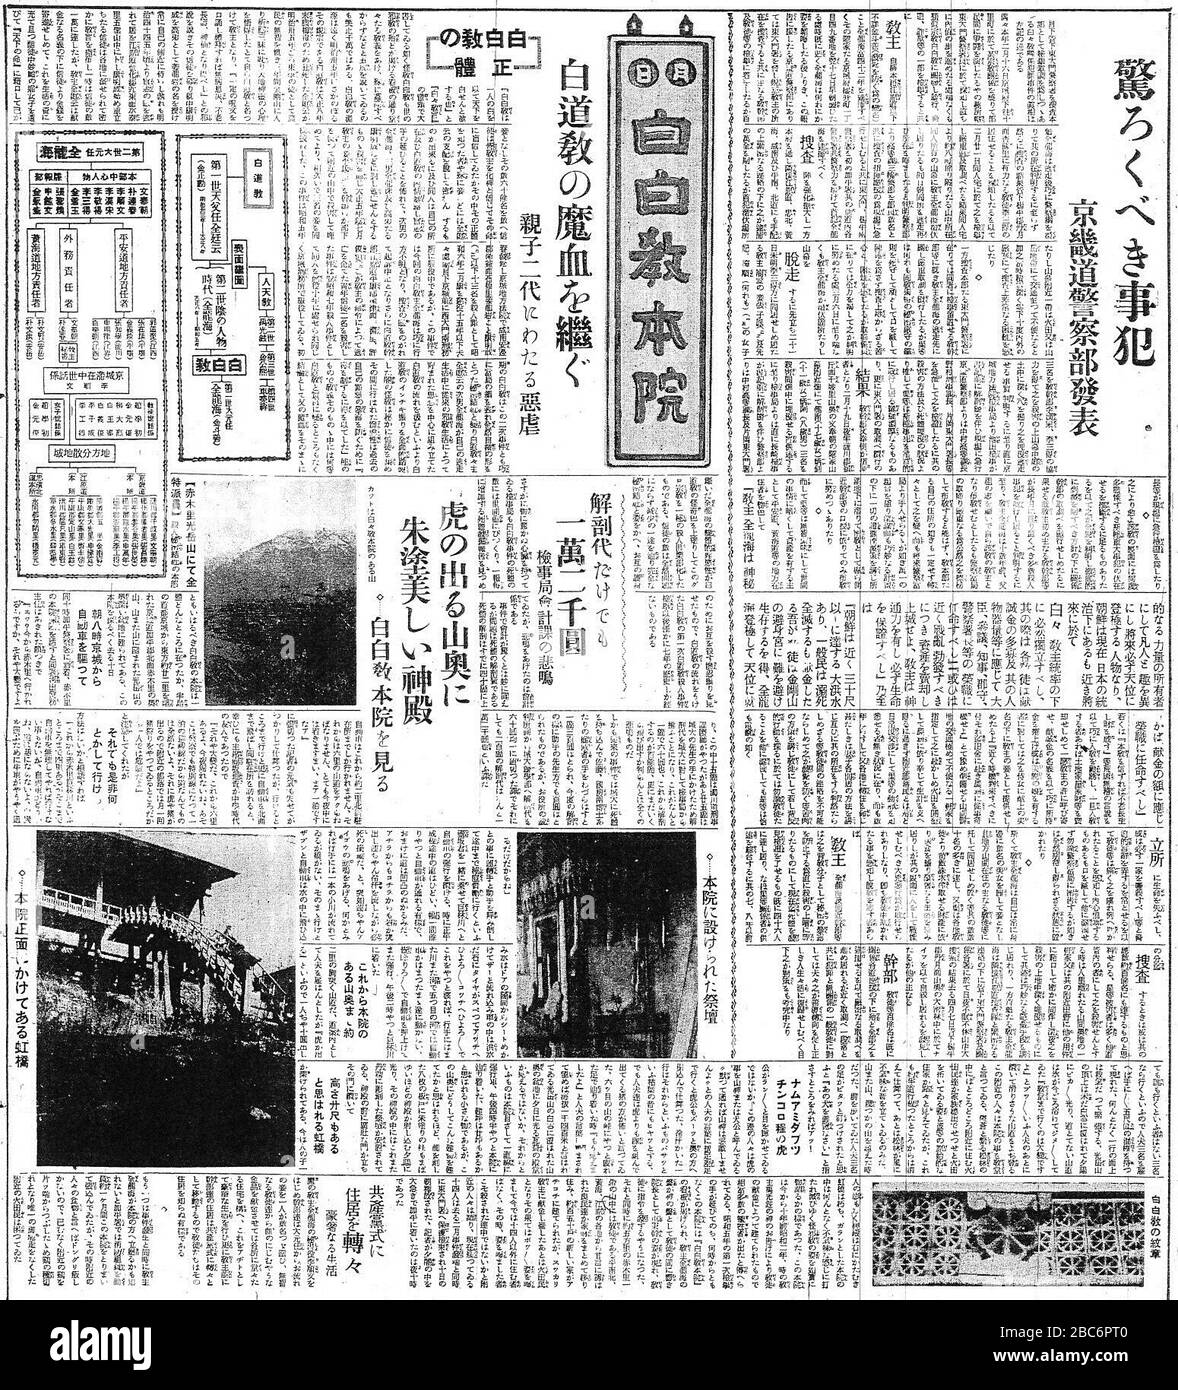 English Keijo Nippo Extra Edition Coupures De Presse 13 Avril 1937 Issue 日本語 1937年4月13日の京城日報号外の記事 13 Avril 1937 Anglais Journal Japonais Keijo Nippo Extra Edition 13 Avril 1937 Issue Publie Par Keijo Nippo 日本語 京城日報社